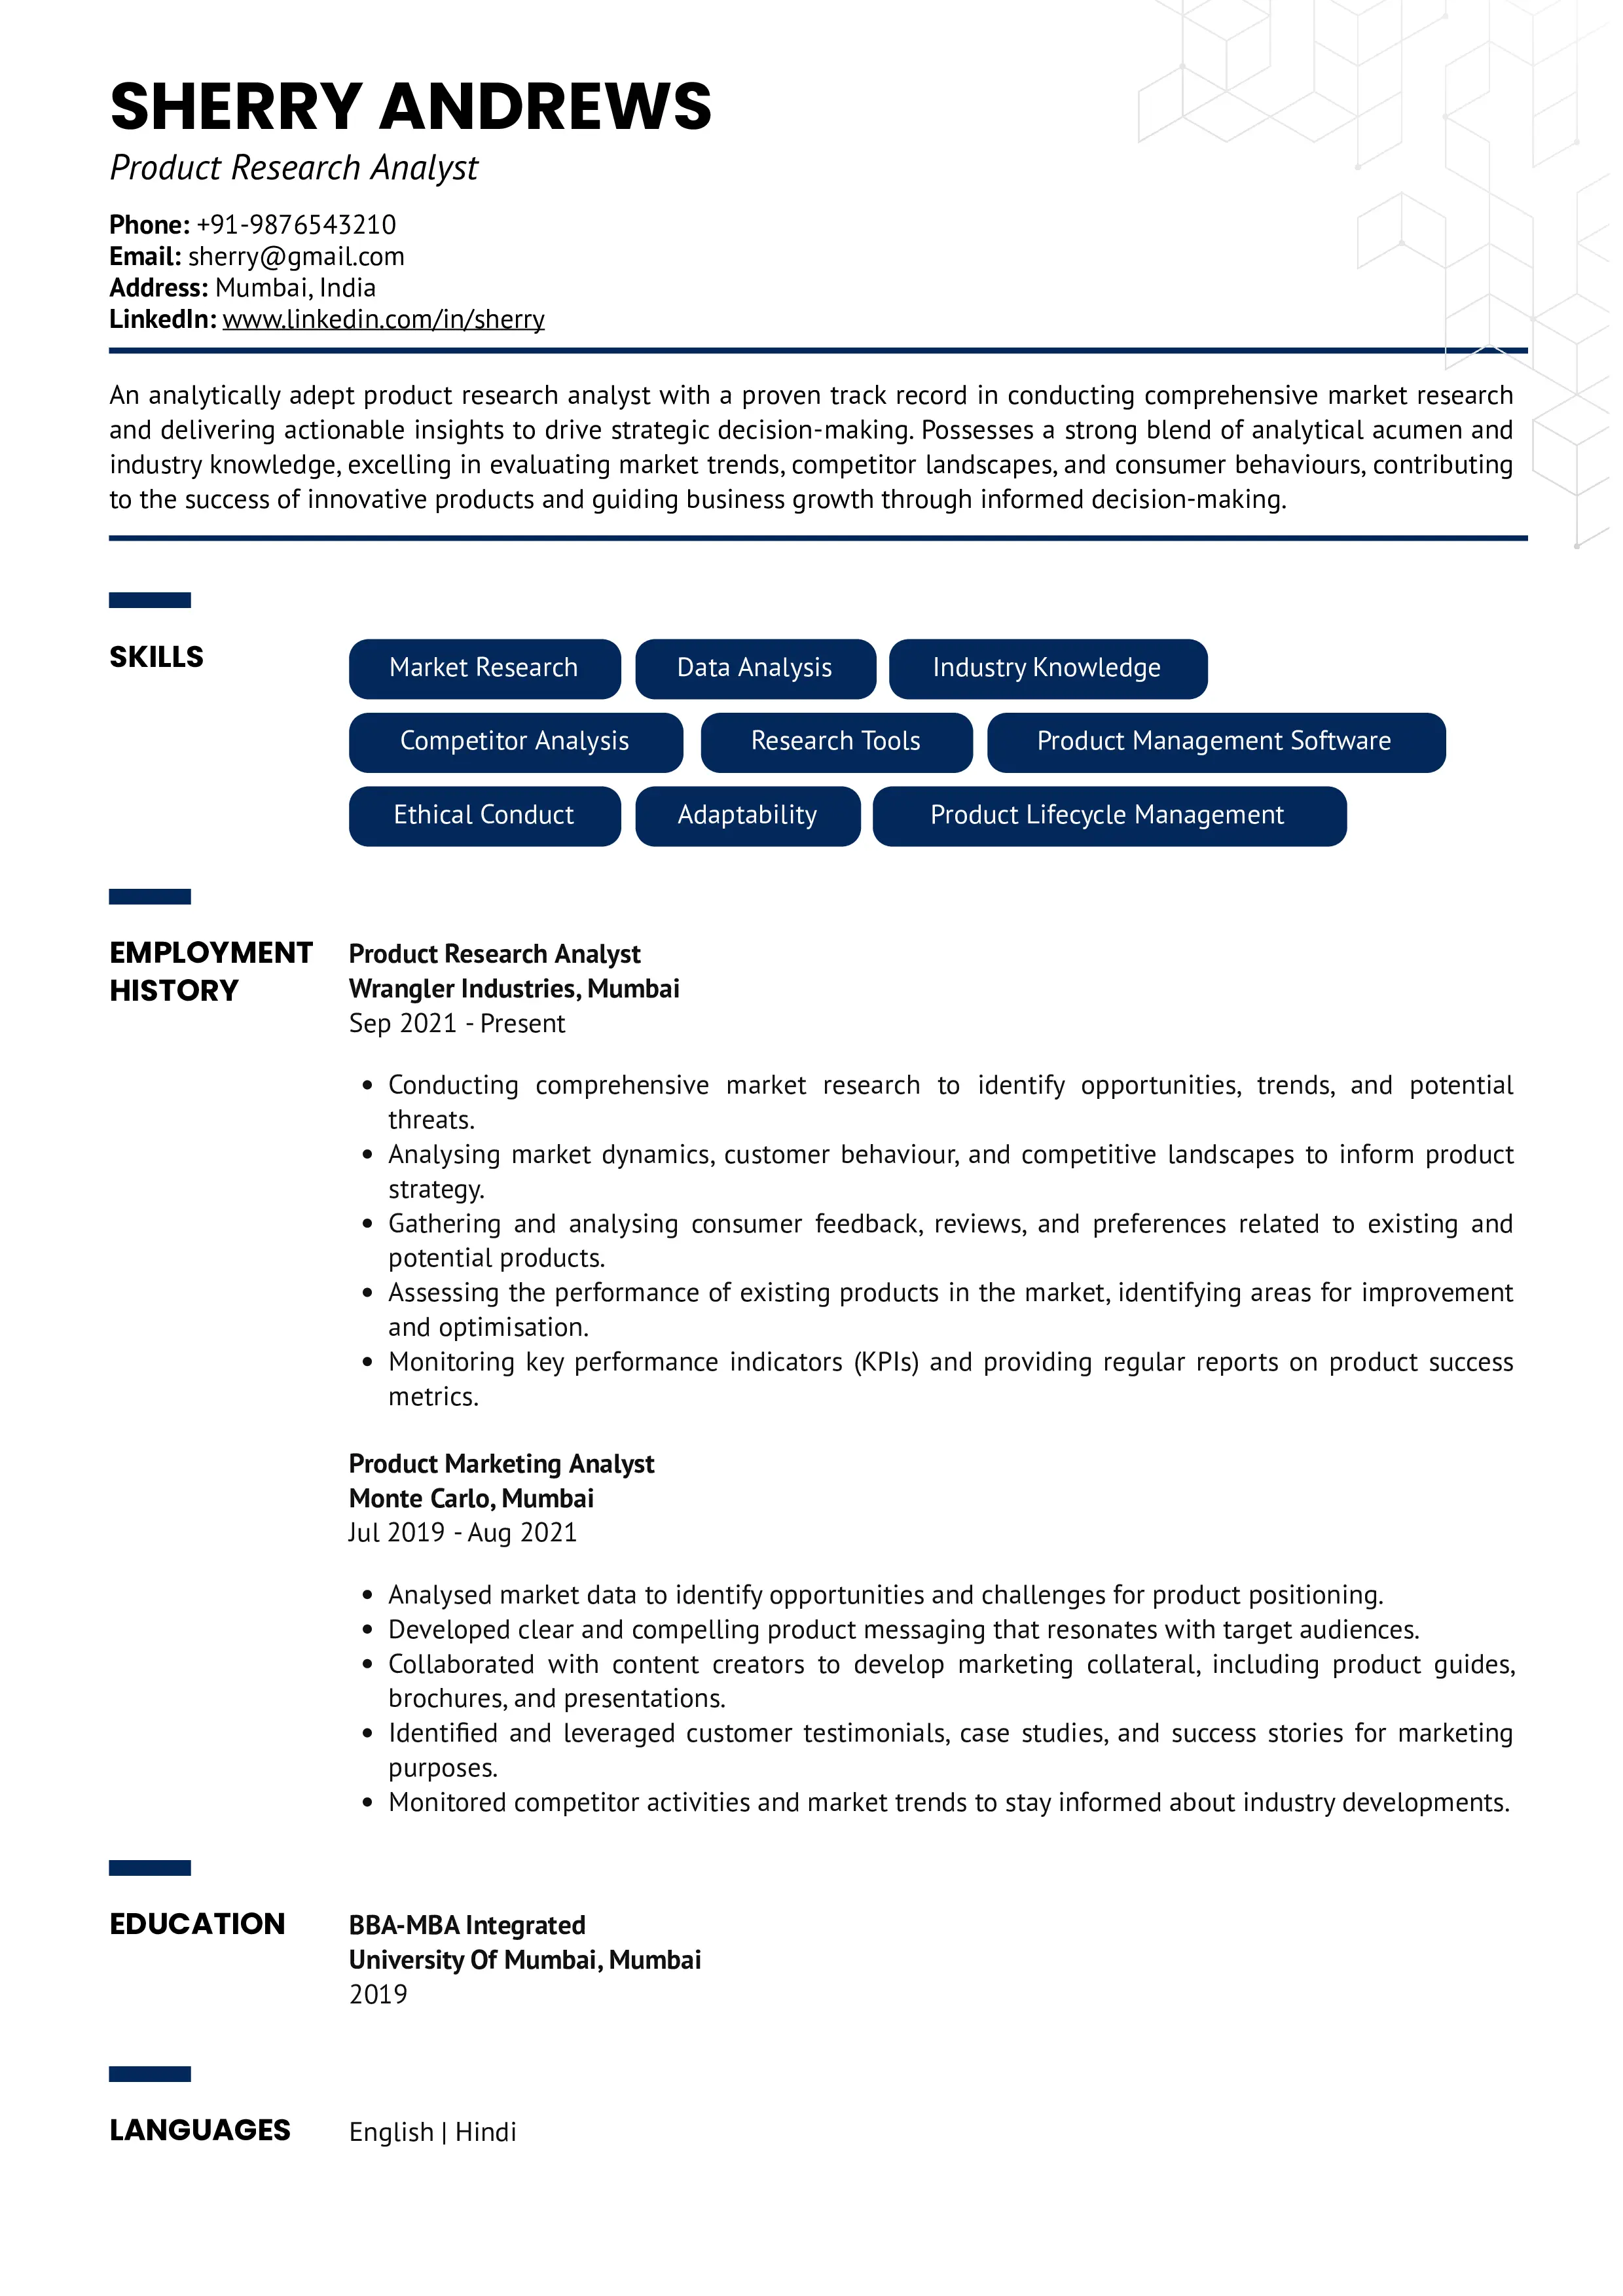 Sample Resume of Product Research Analyst | Free Resume Templates & Samples on Resumod.co